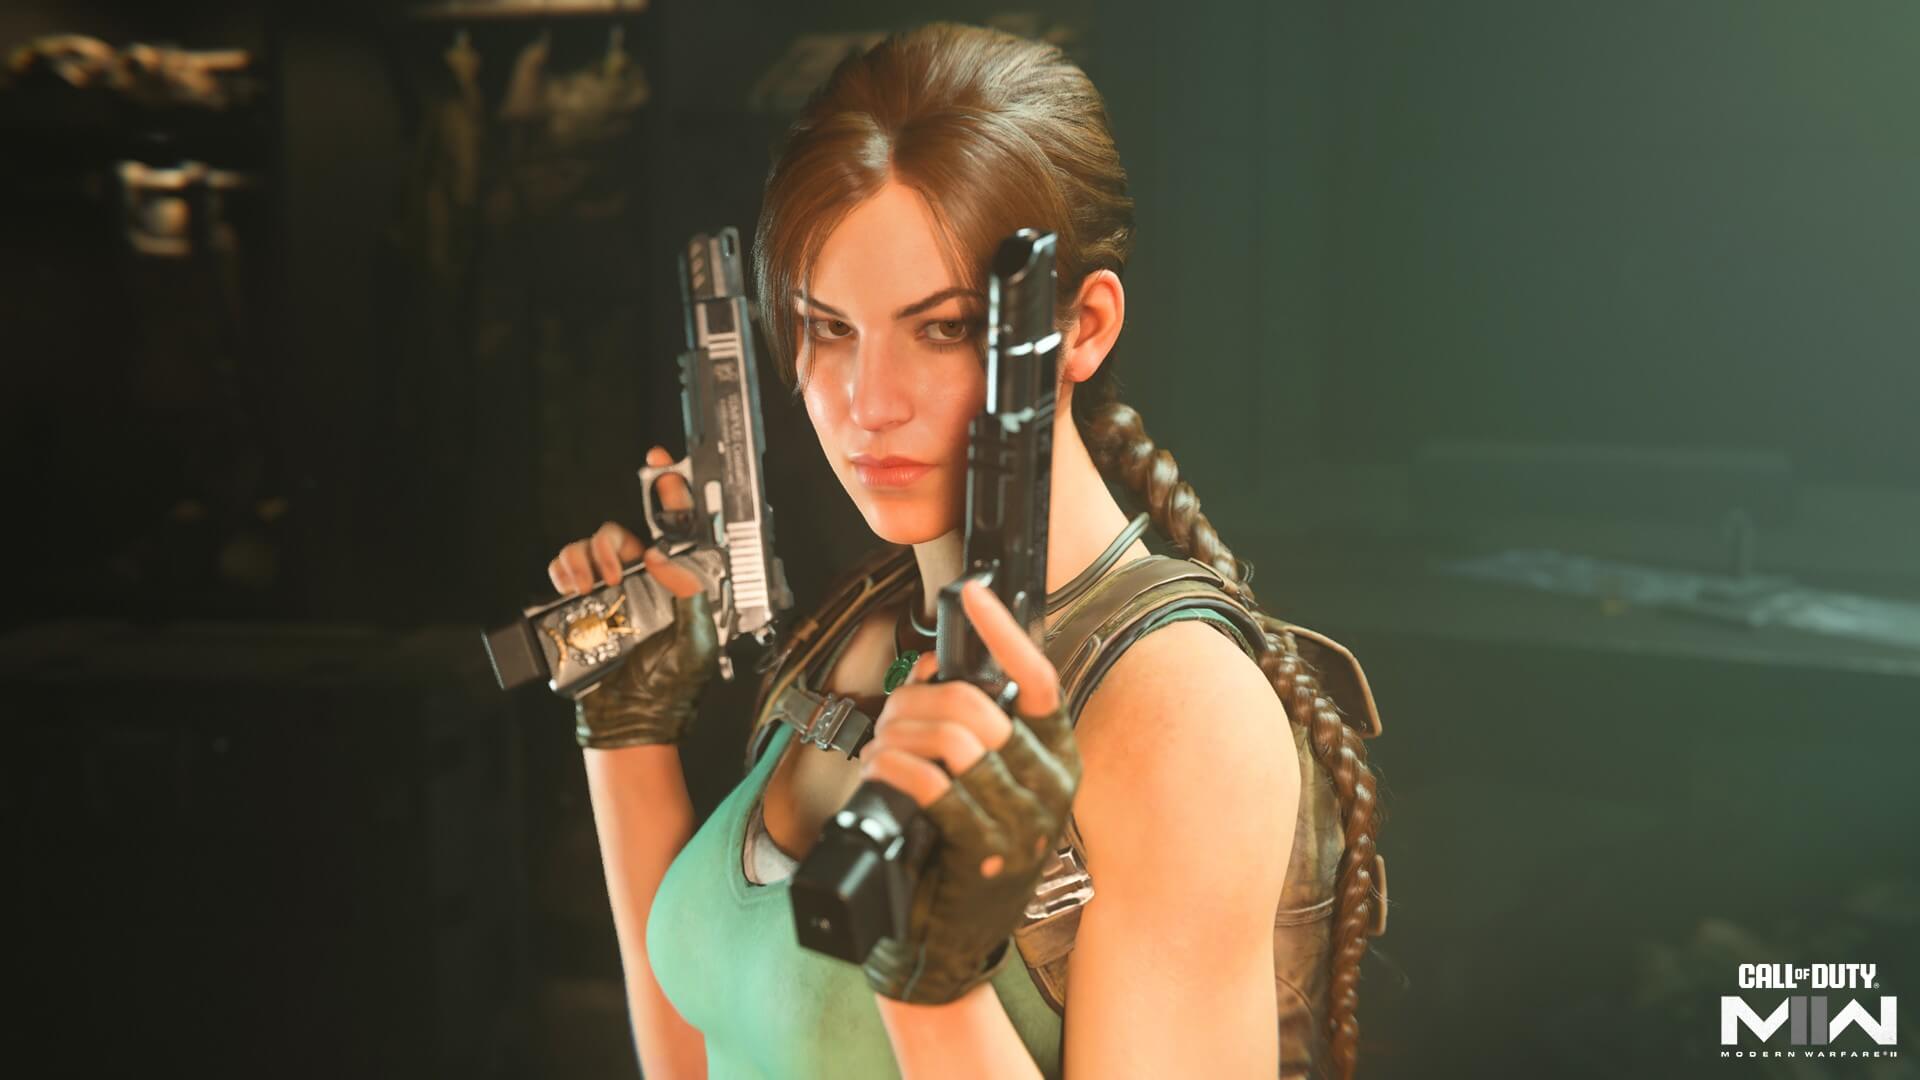 Tomb Raider bundle for Call of Duty released